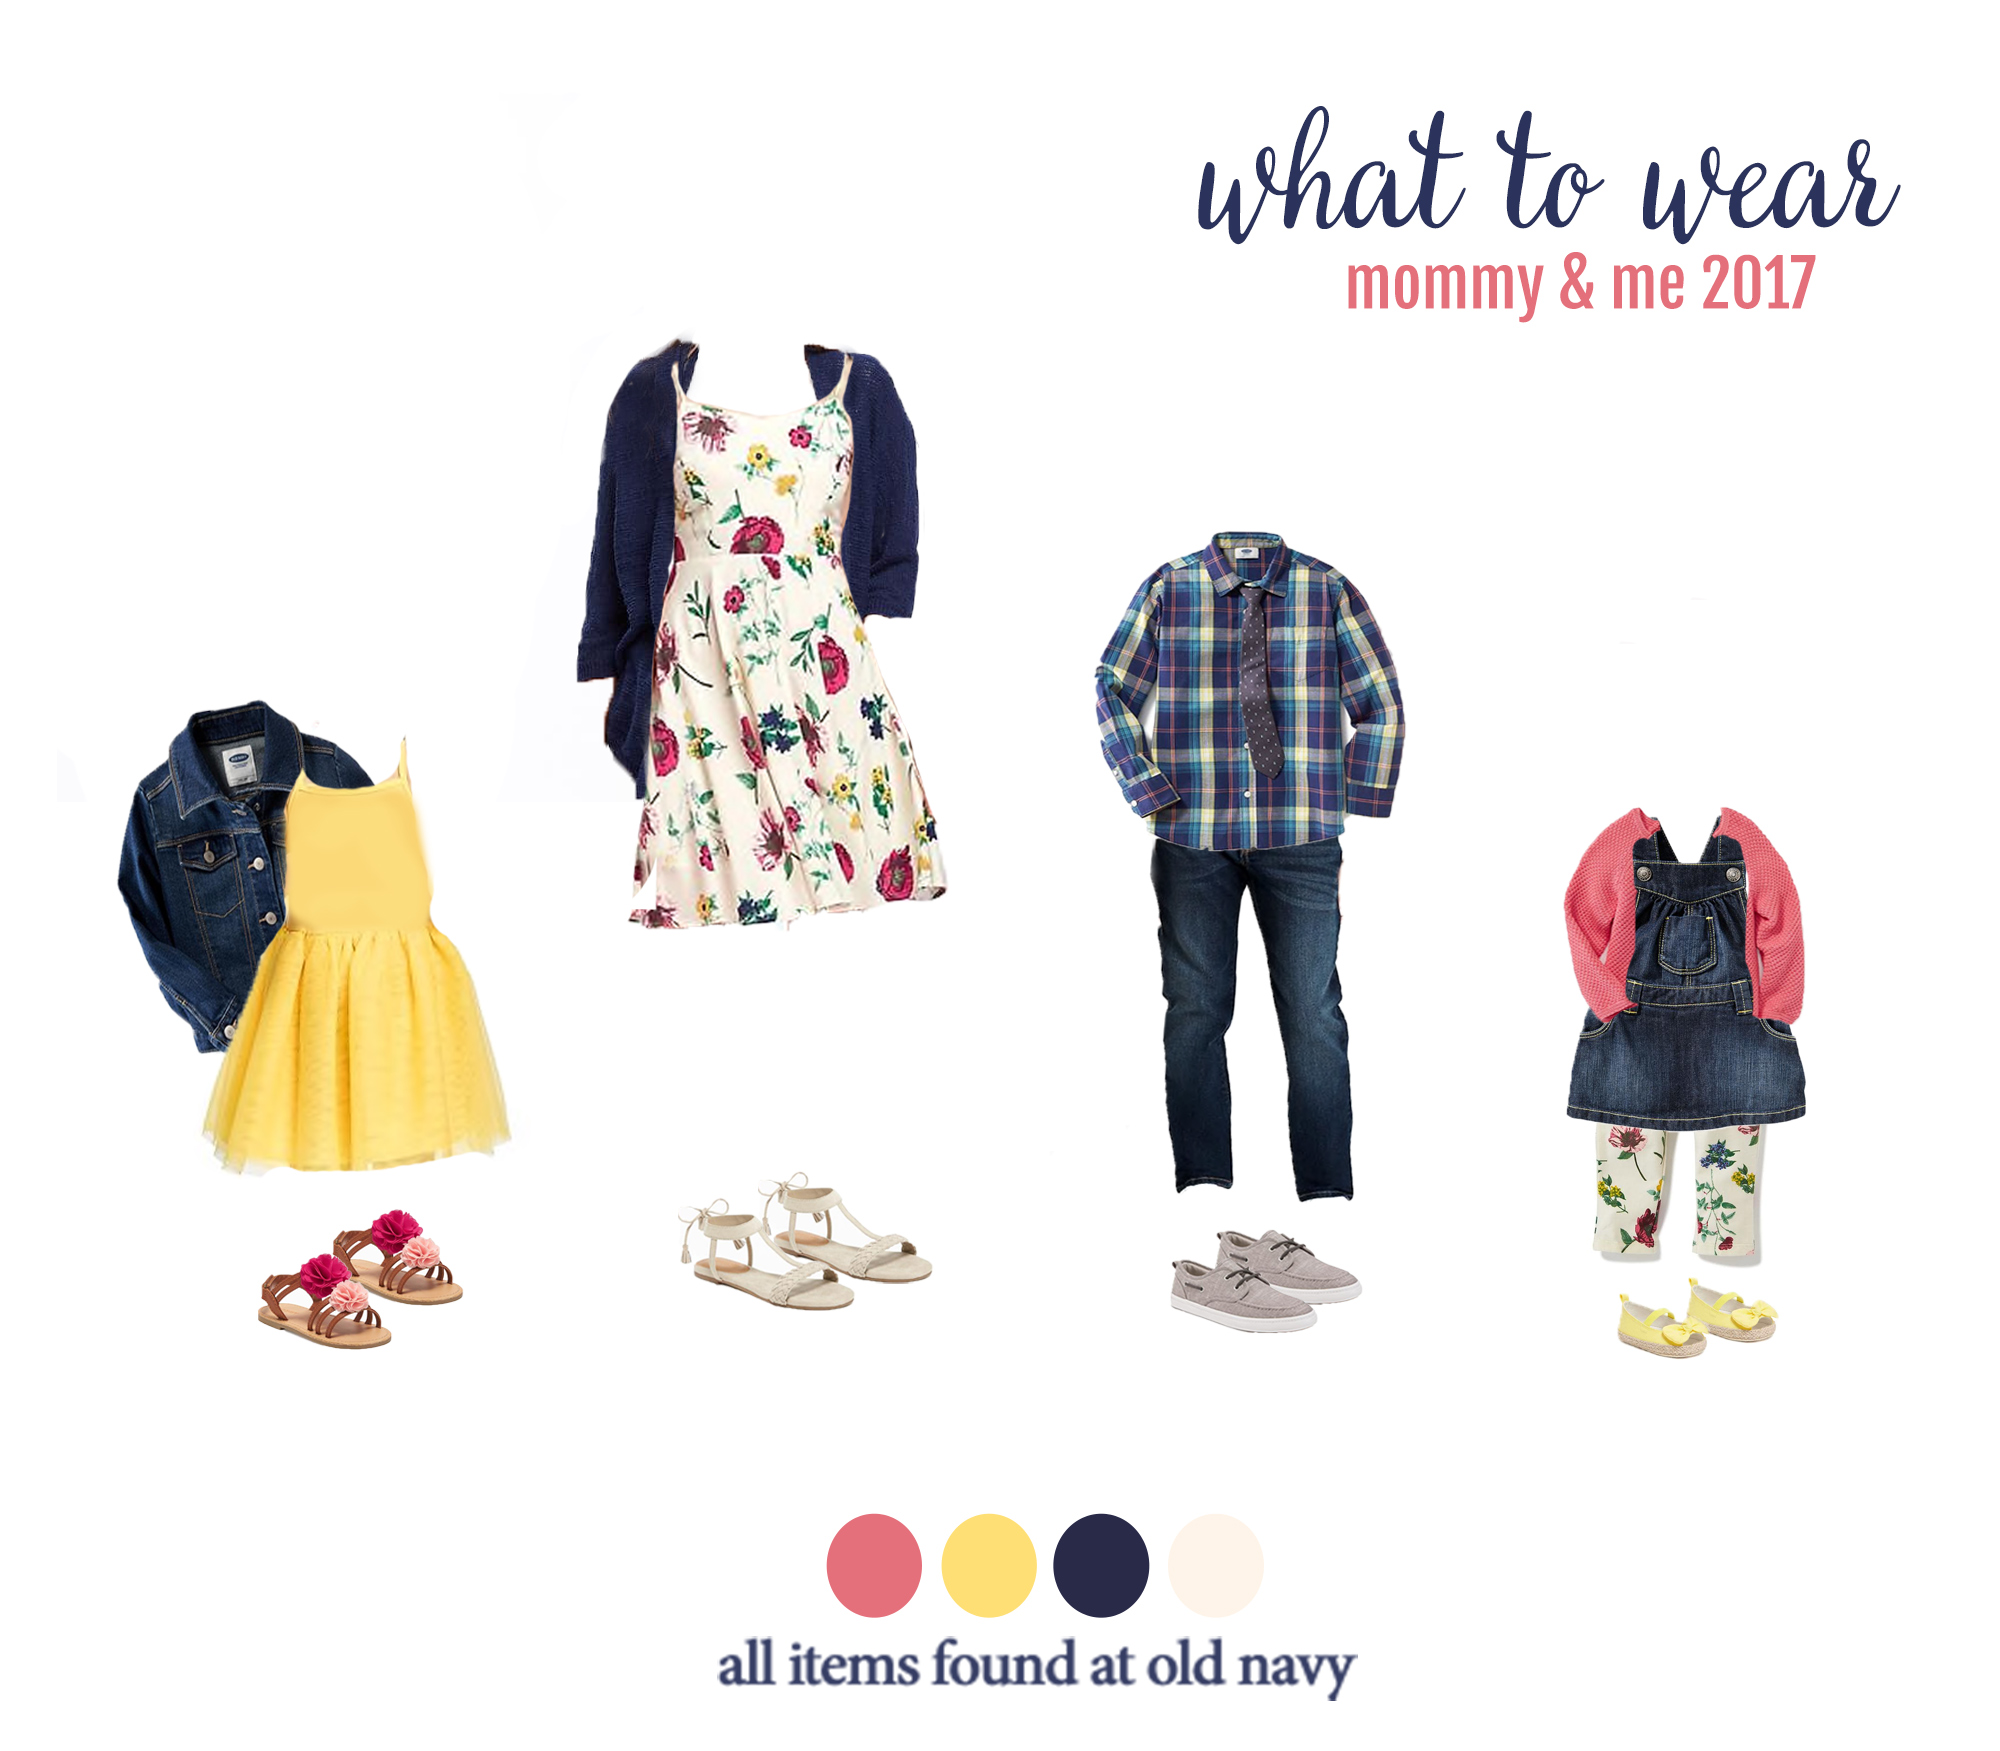 What to wear for mommy and me photos! Perfect for your photo session with Denver photographer, Miss Freddy!